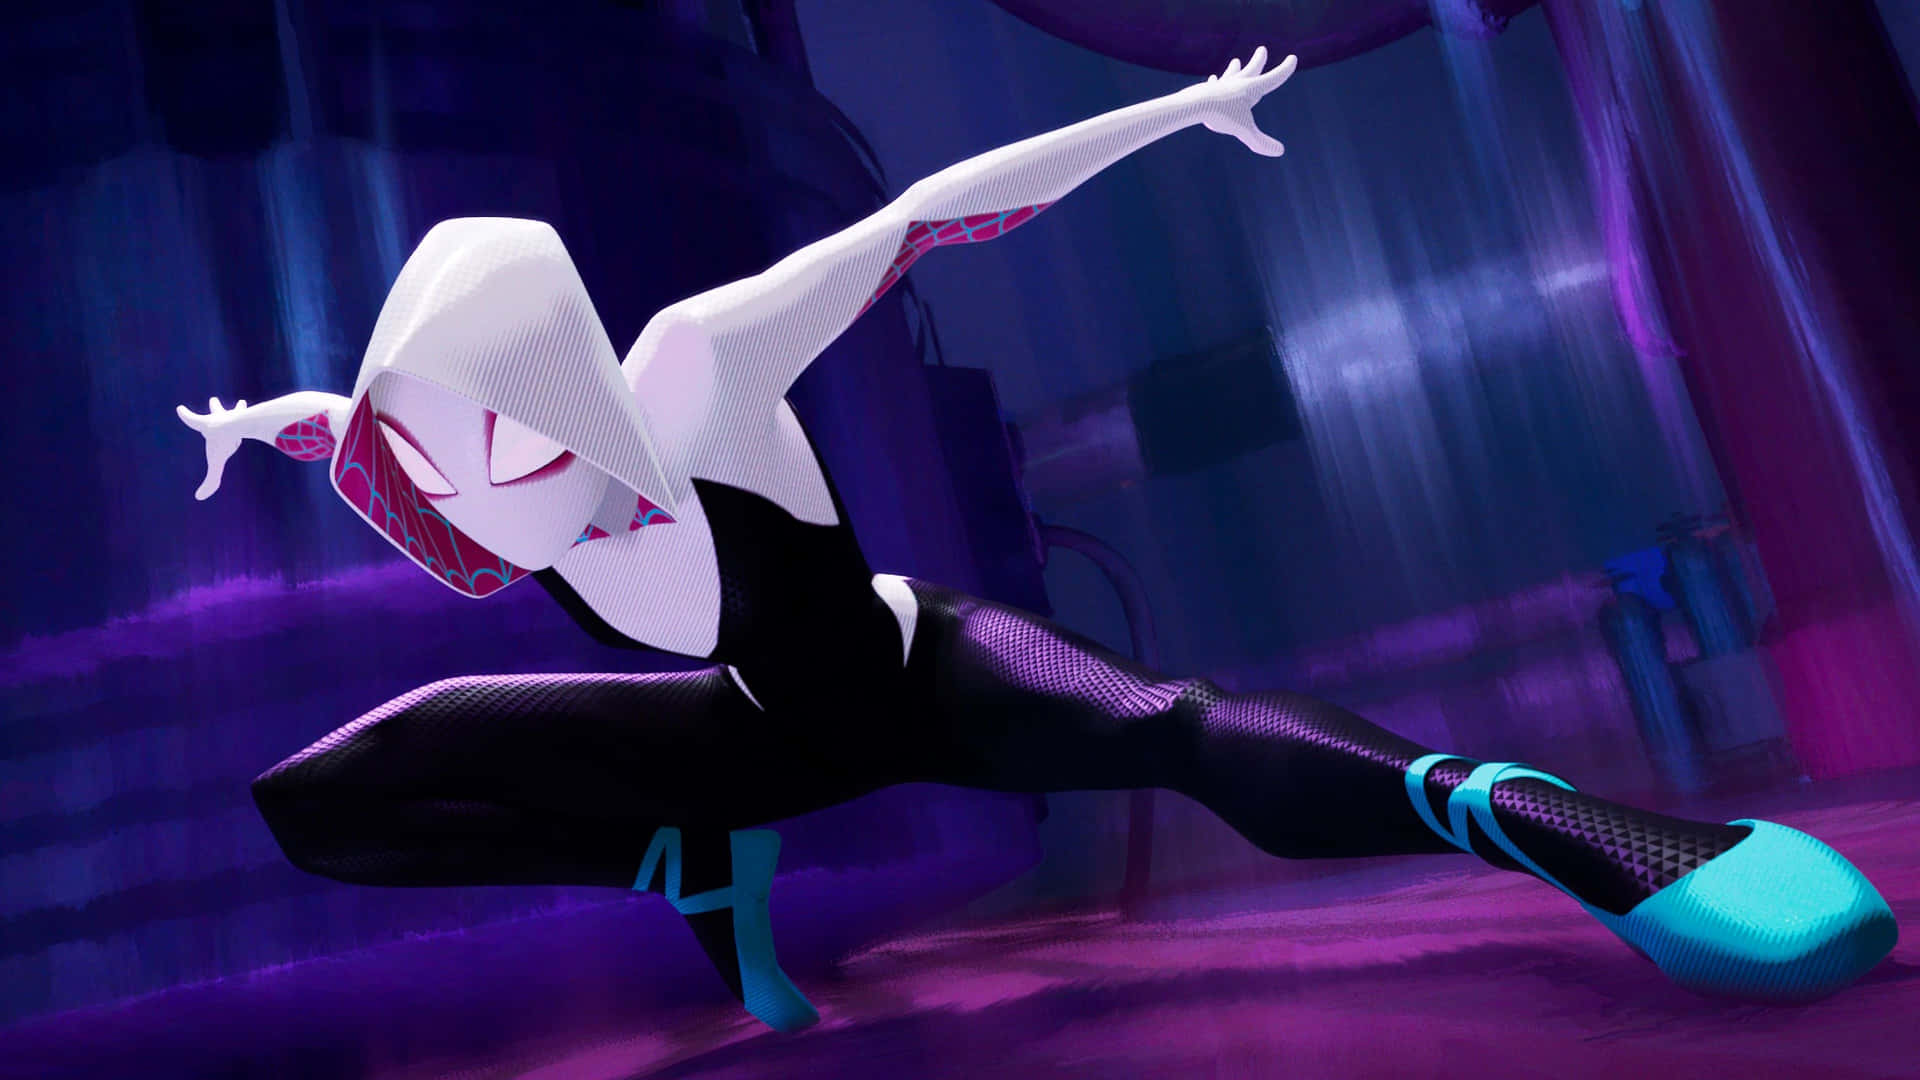 "Spider Gwen Poses Powerfully"